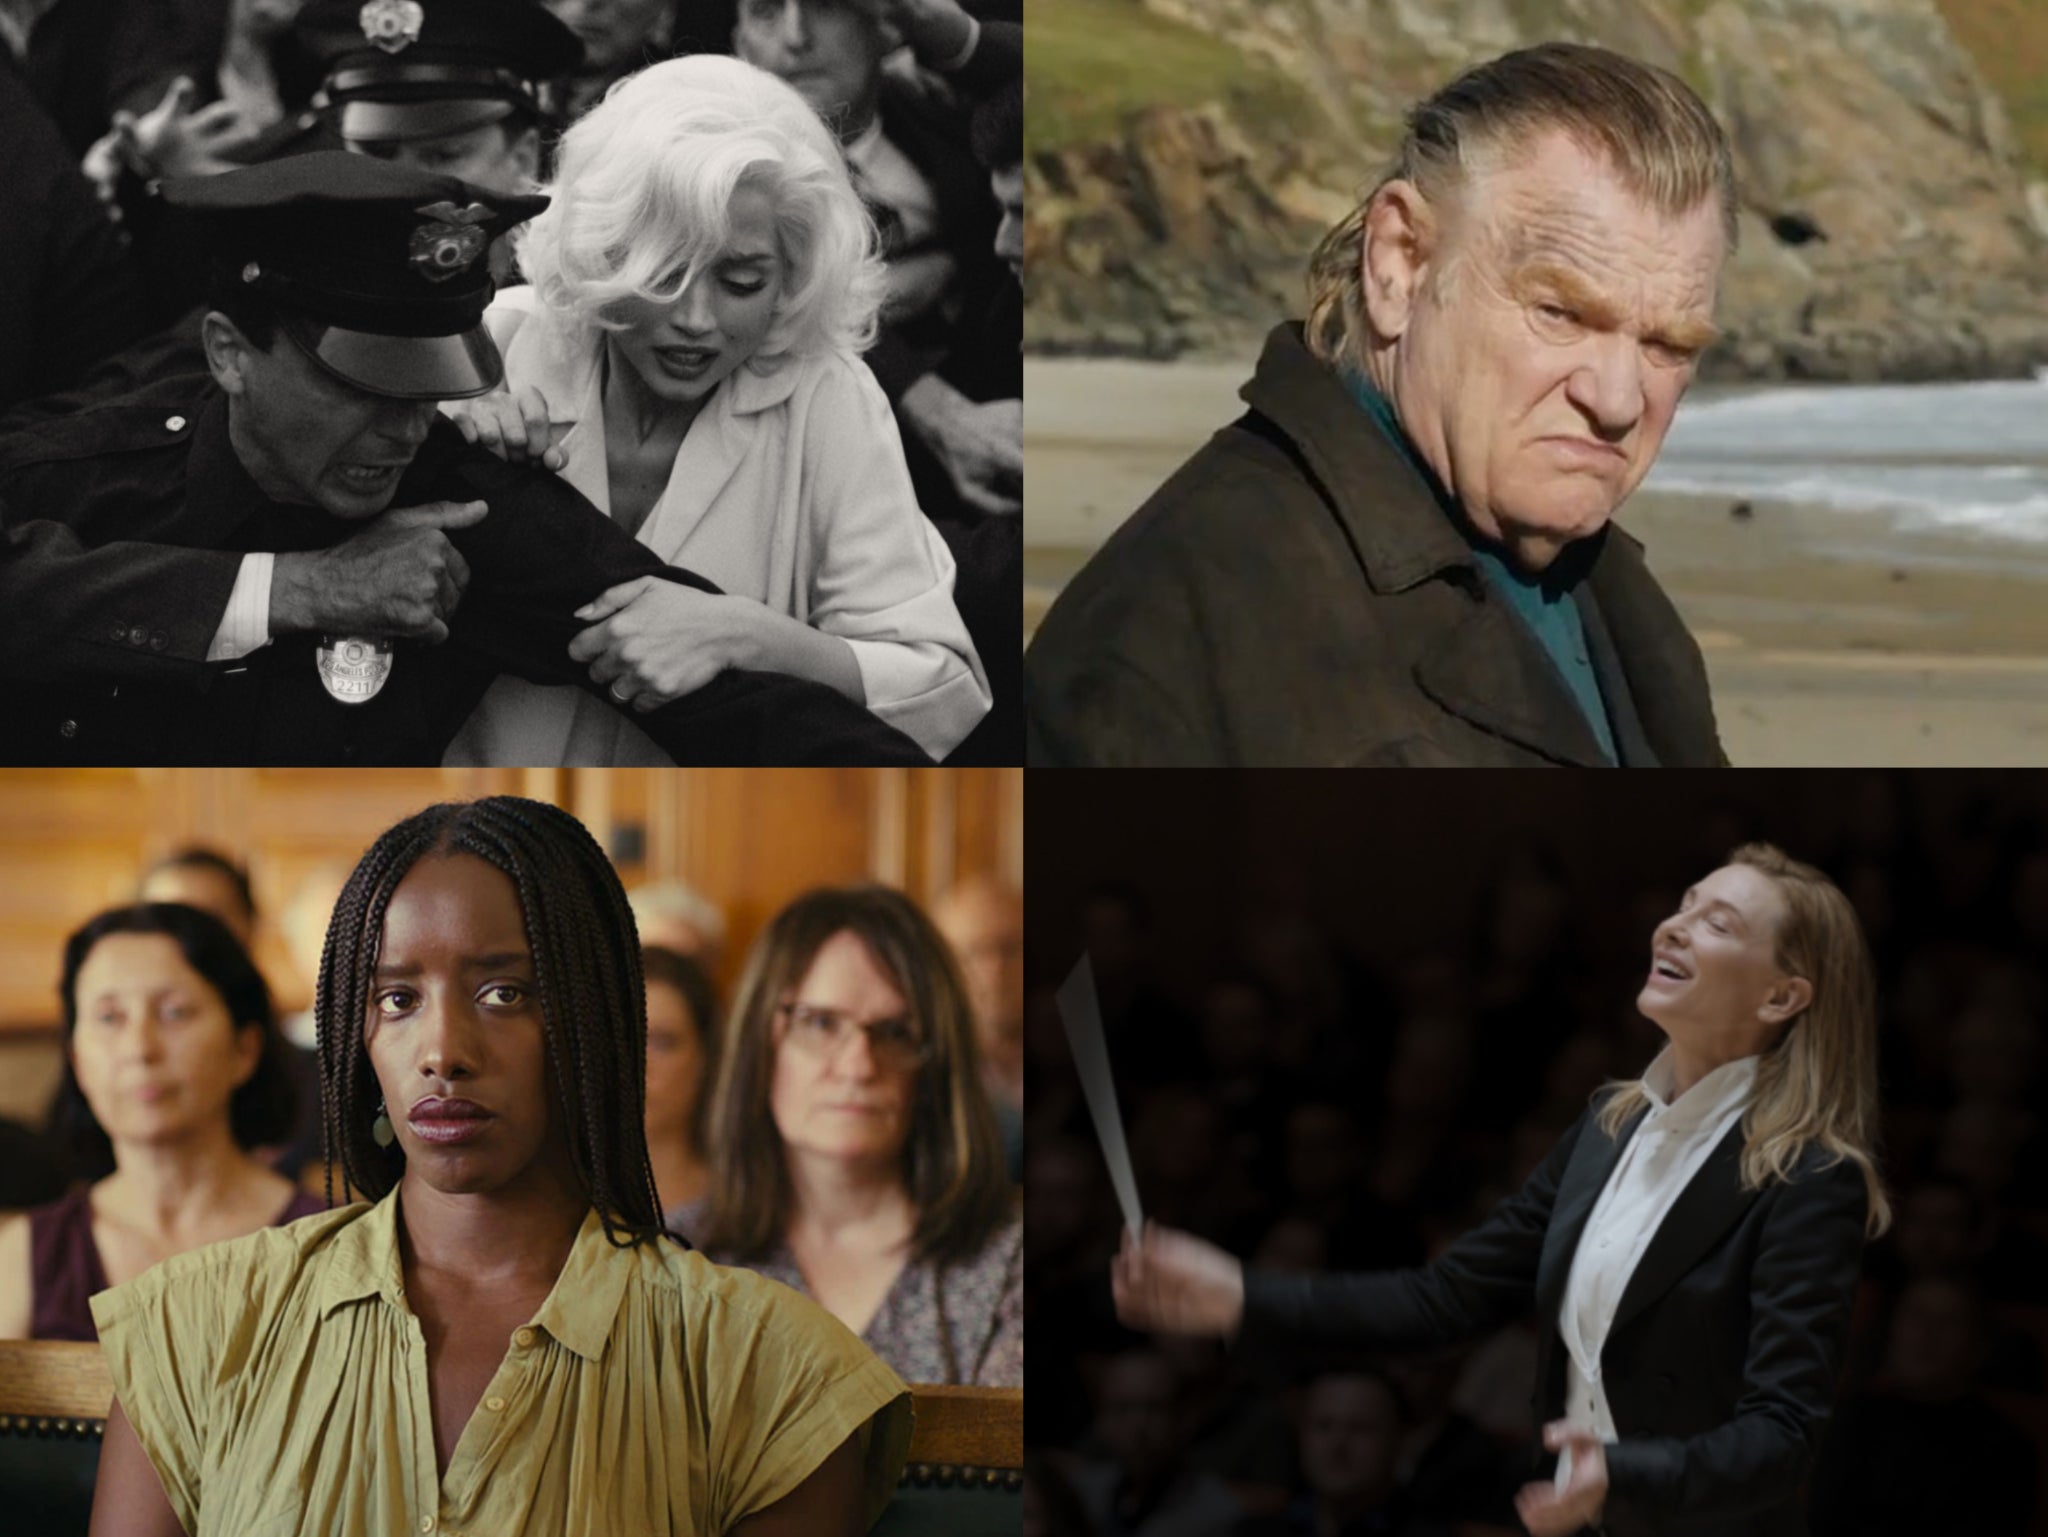 Clockwise from top left: ‘Blonde’, ‘The Banshees of Inisherin’, ‘Tár’ and ‘Saint’ Omer’ were among the frontrunners in this year’s competition